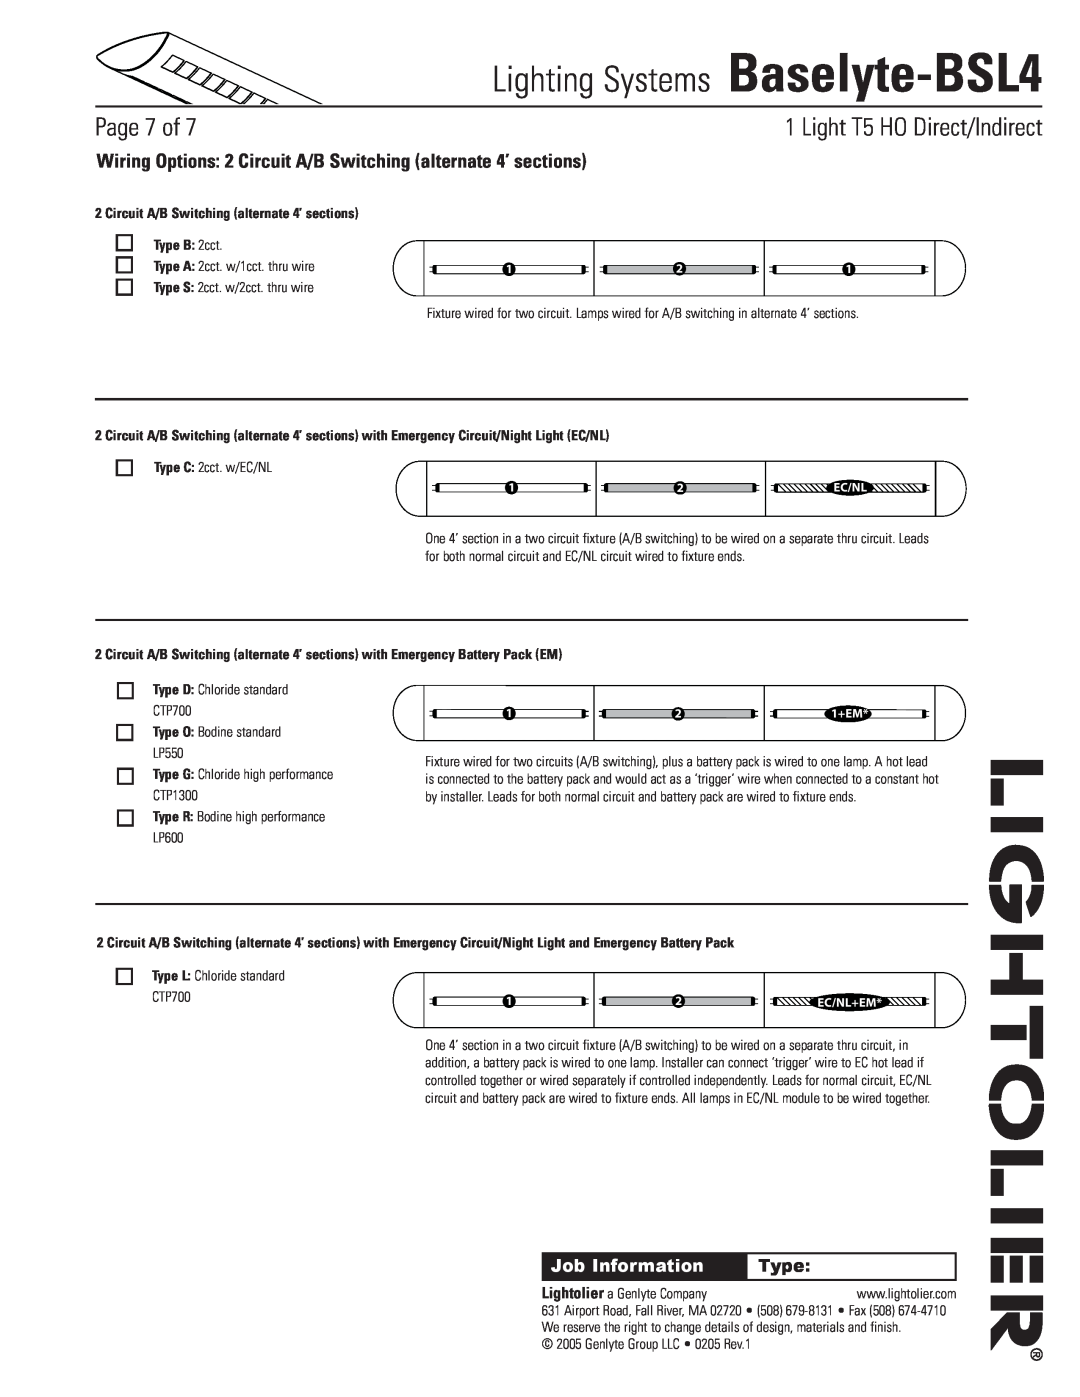 Lightolier Baselyte-BSL4 Circuit A/B Switching alternate 4’ sections, Type B 2cct, Type O Bodine standard LP550, Page of 